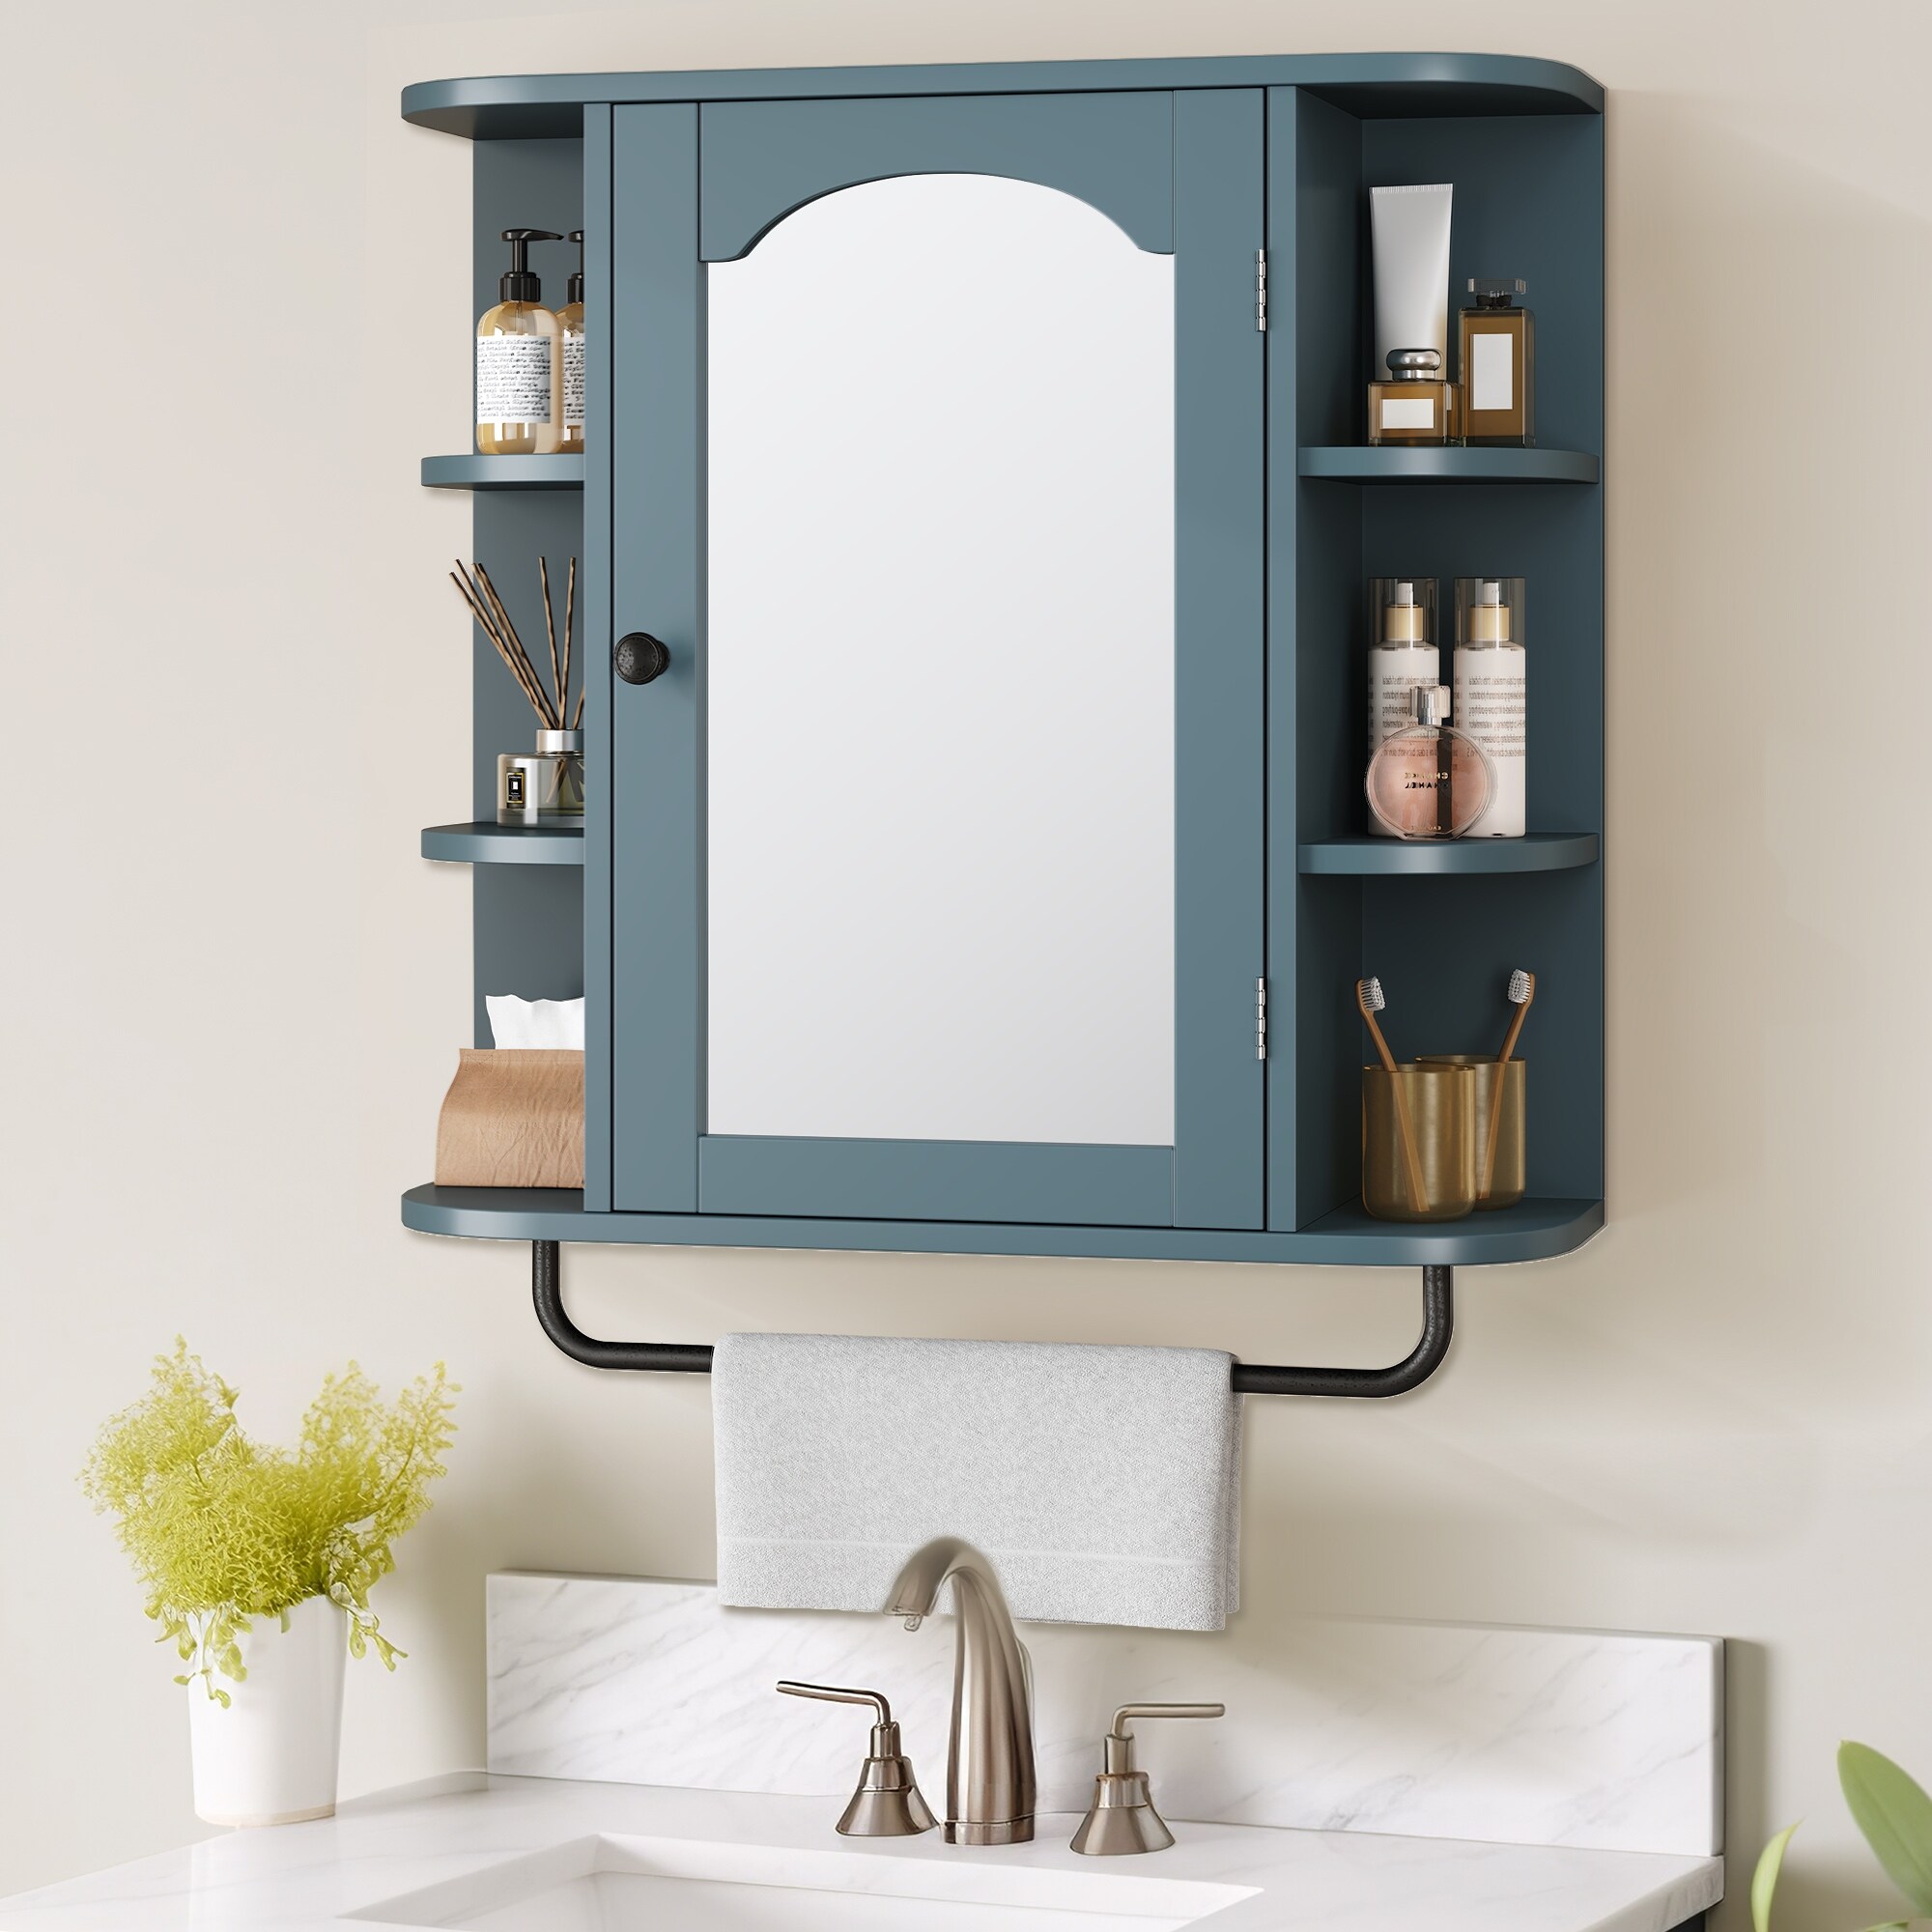 https://ak1.ostkcdn.com/images/products/is/images/direct/cc6a0dc3b7fe625699a174d4d2ed1851627564e7/Modern-Wall-Bathroom-Storage-Medicine-Cabinet-with-Adjustable-Shelves-and-Towel-Rack.jpg